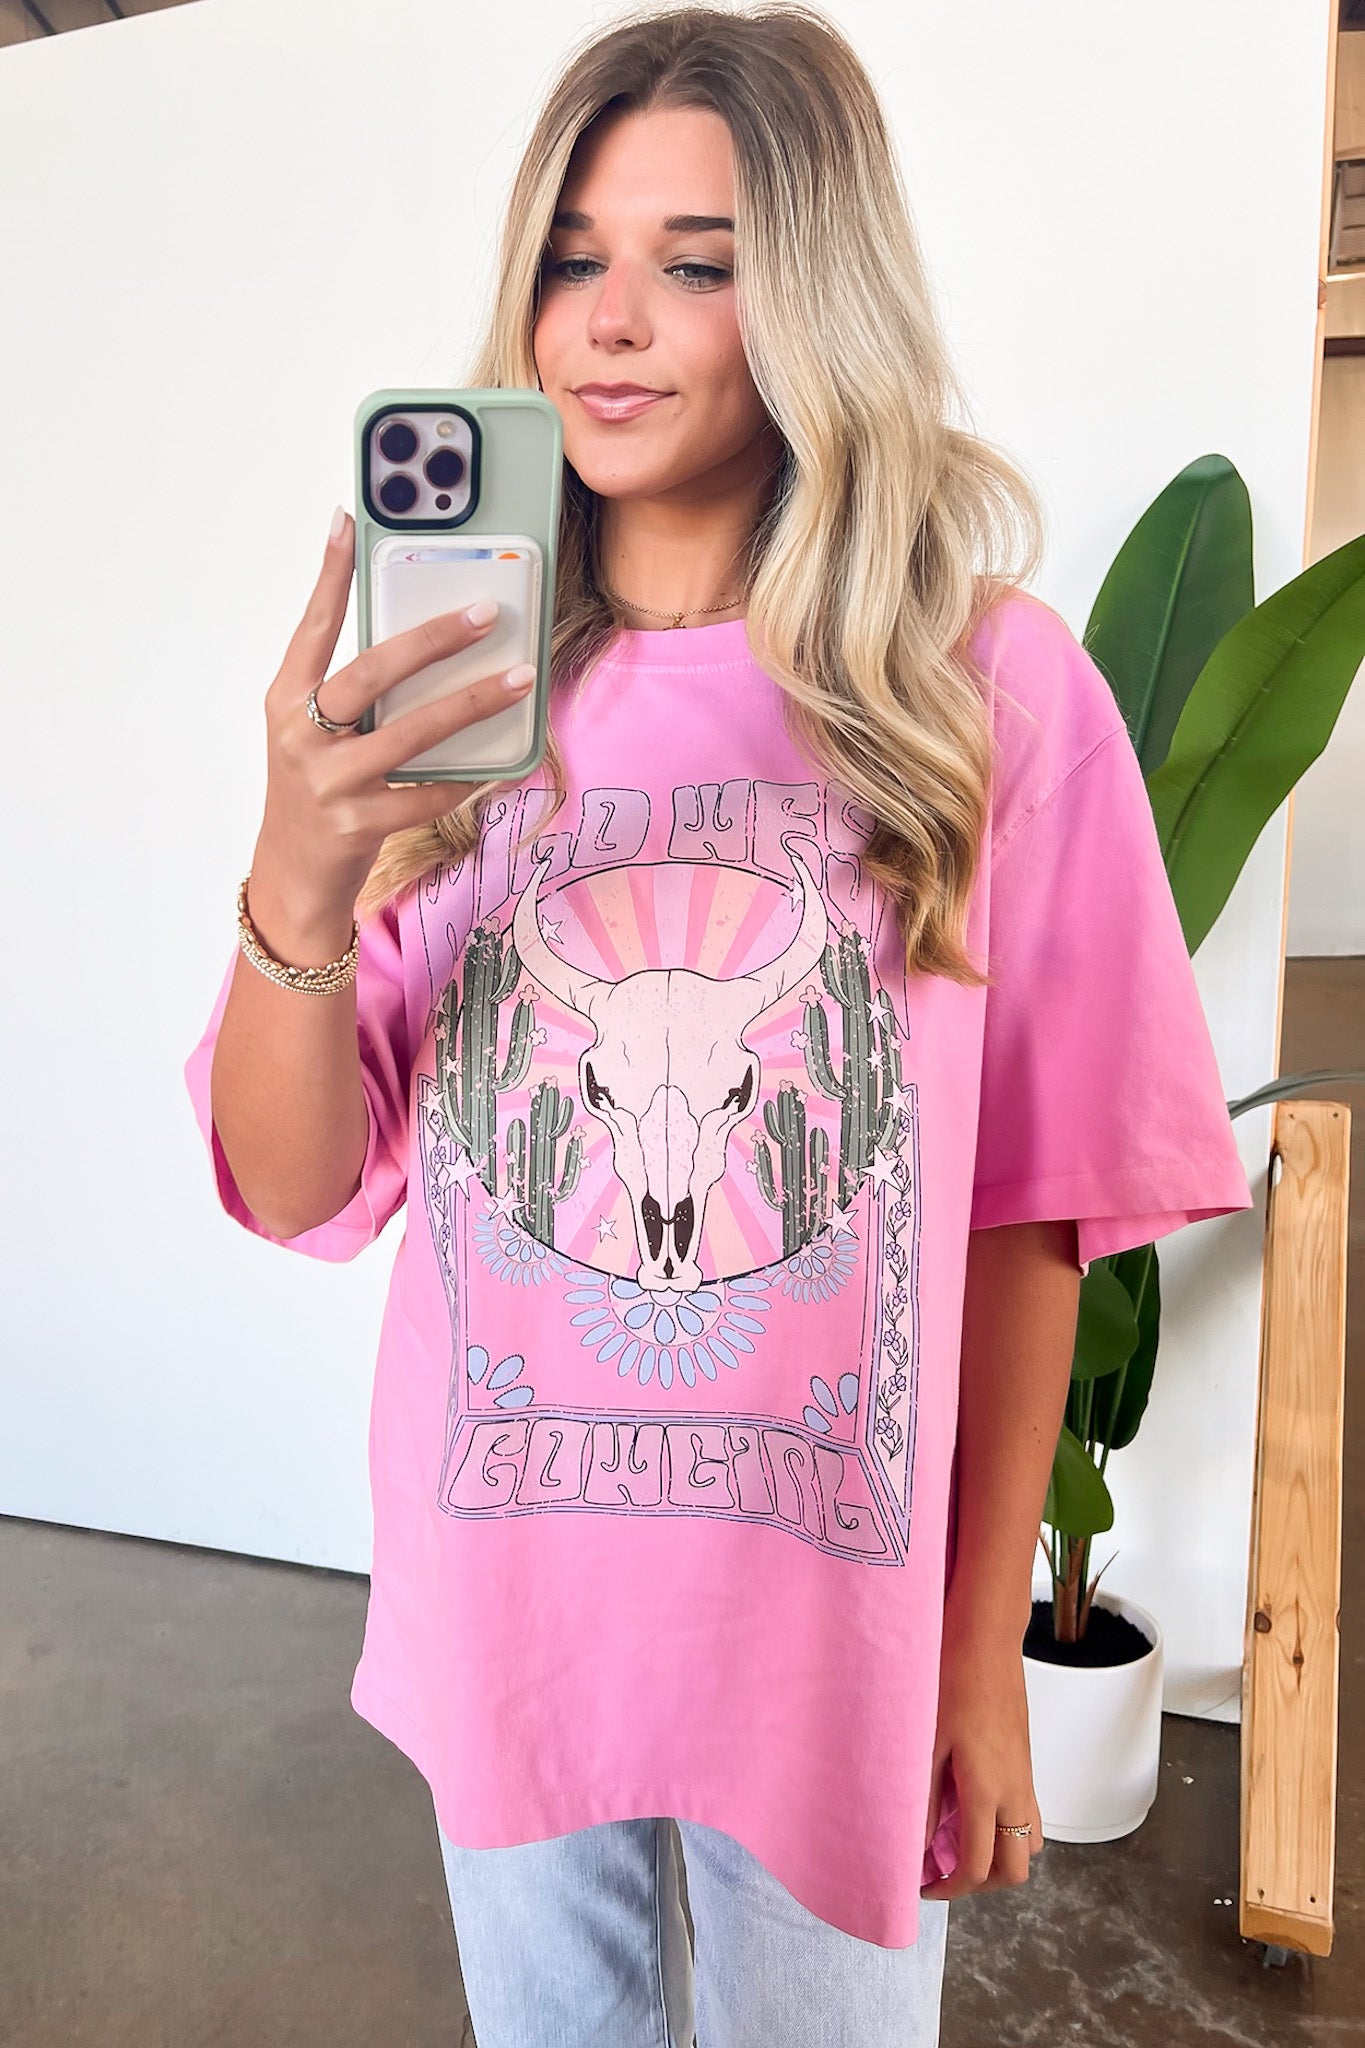  Wild West Cowgirl Oversized Graphic Tee - Madison and Mallory